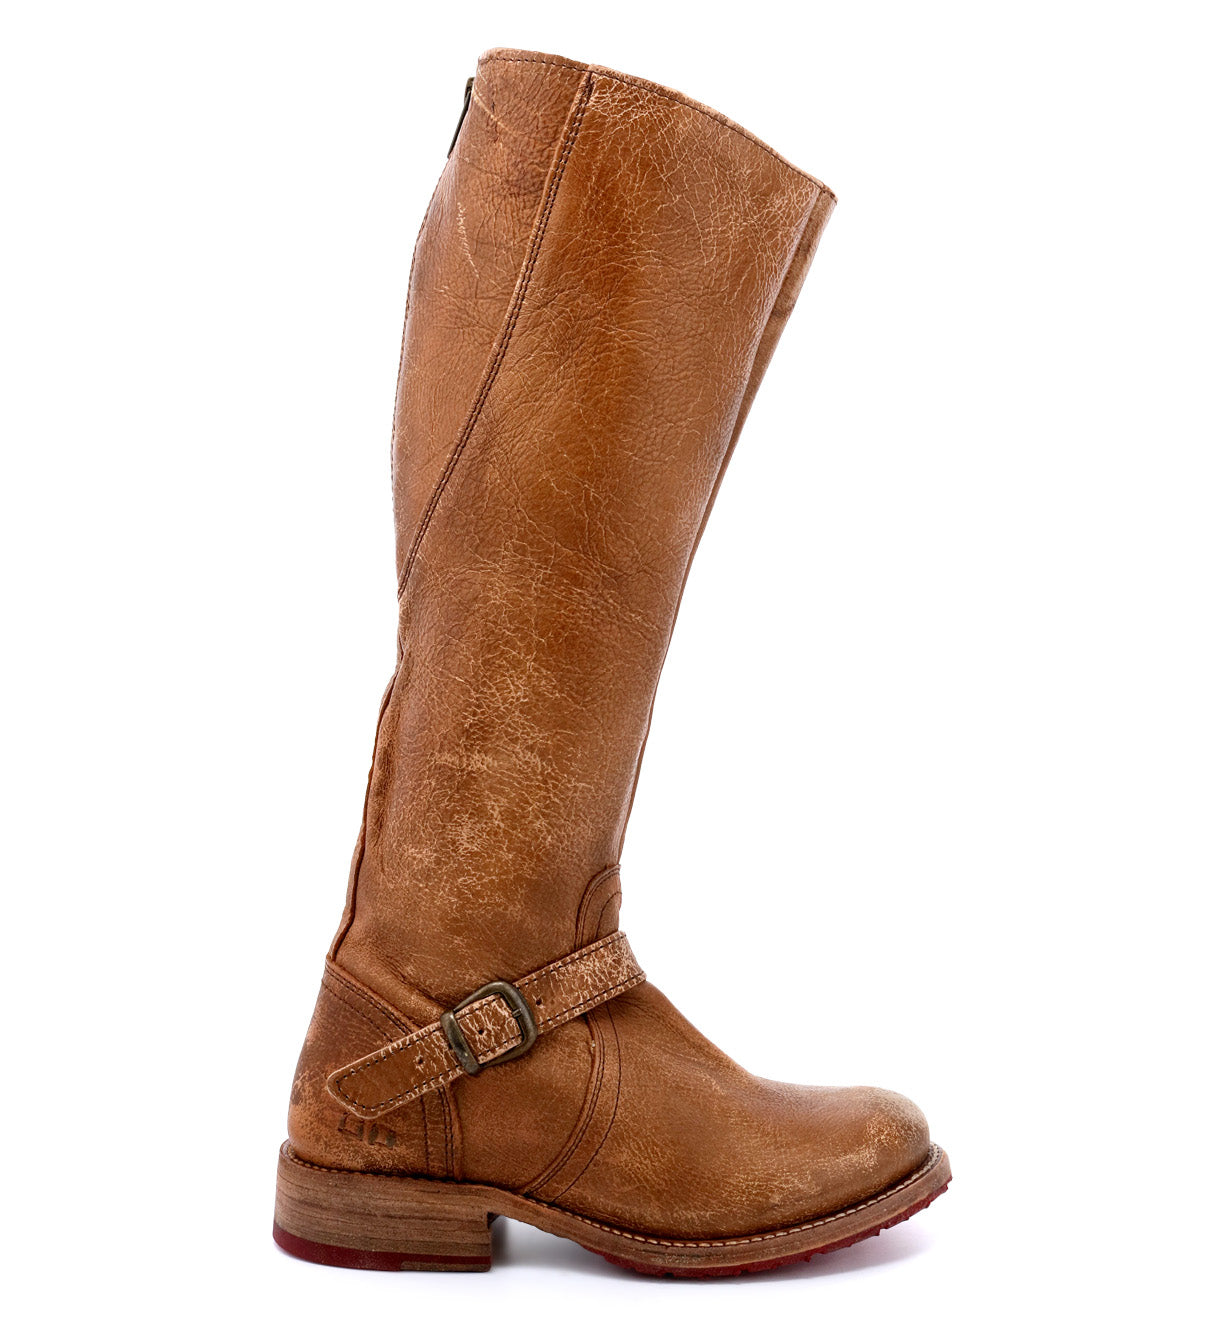 A women's Glaye tan leather riding boot by Bed Stu.